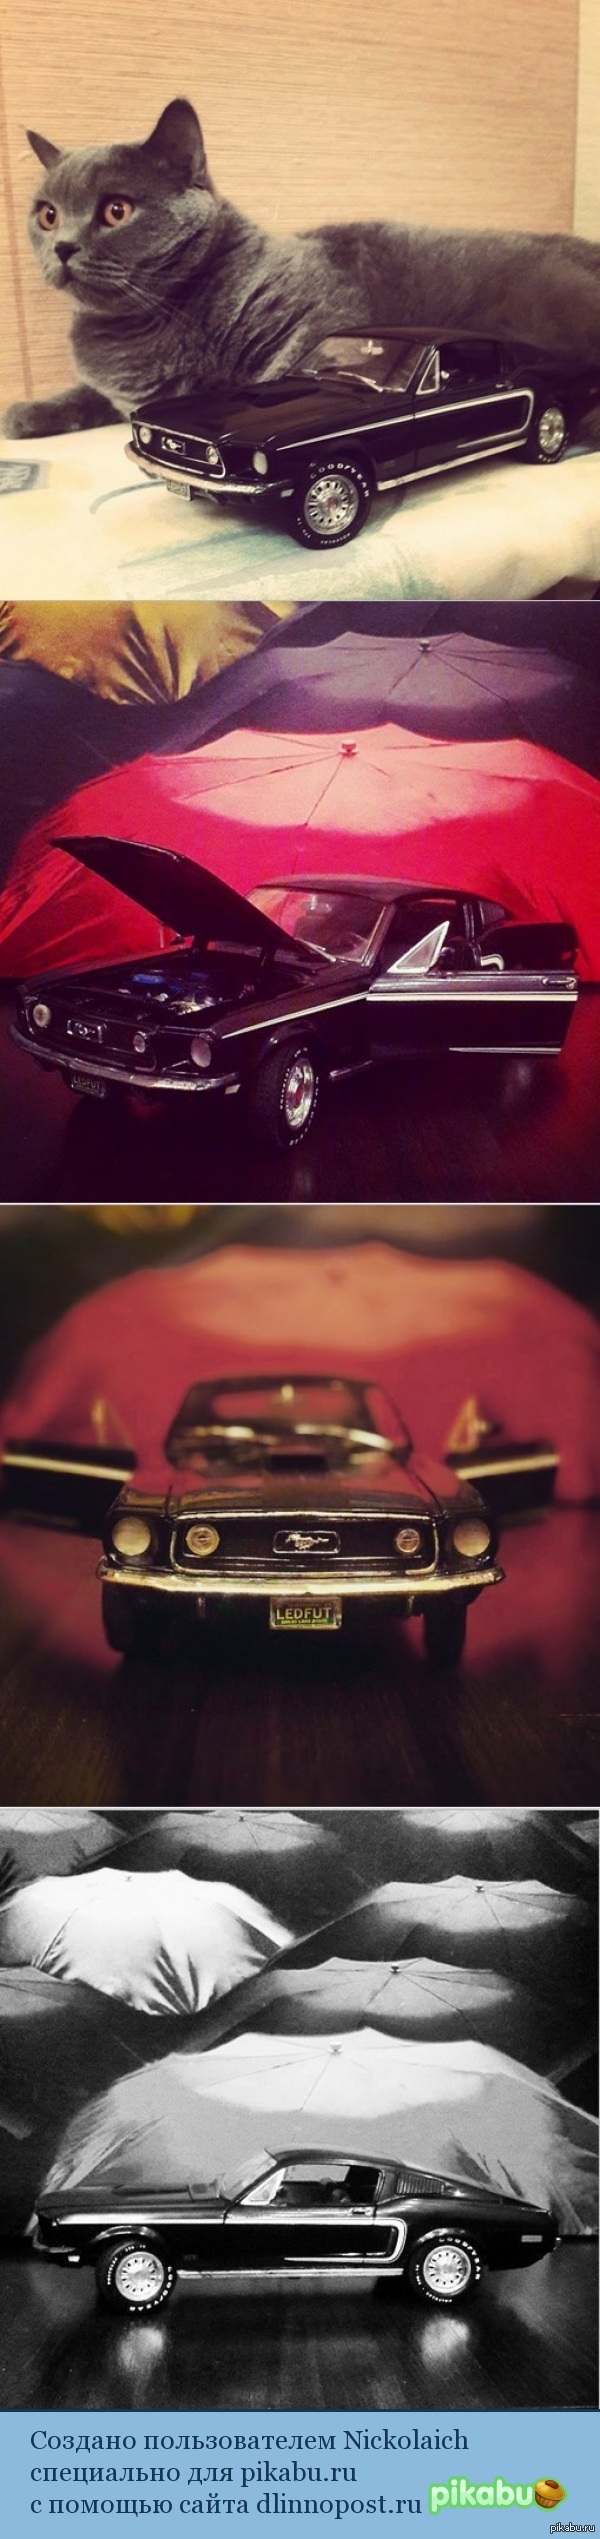   )))     . ETLB Collectable Ford Mustang 67,  1/18.     1/1   ))).    ,  